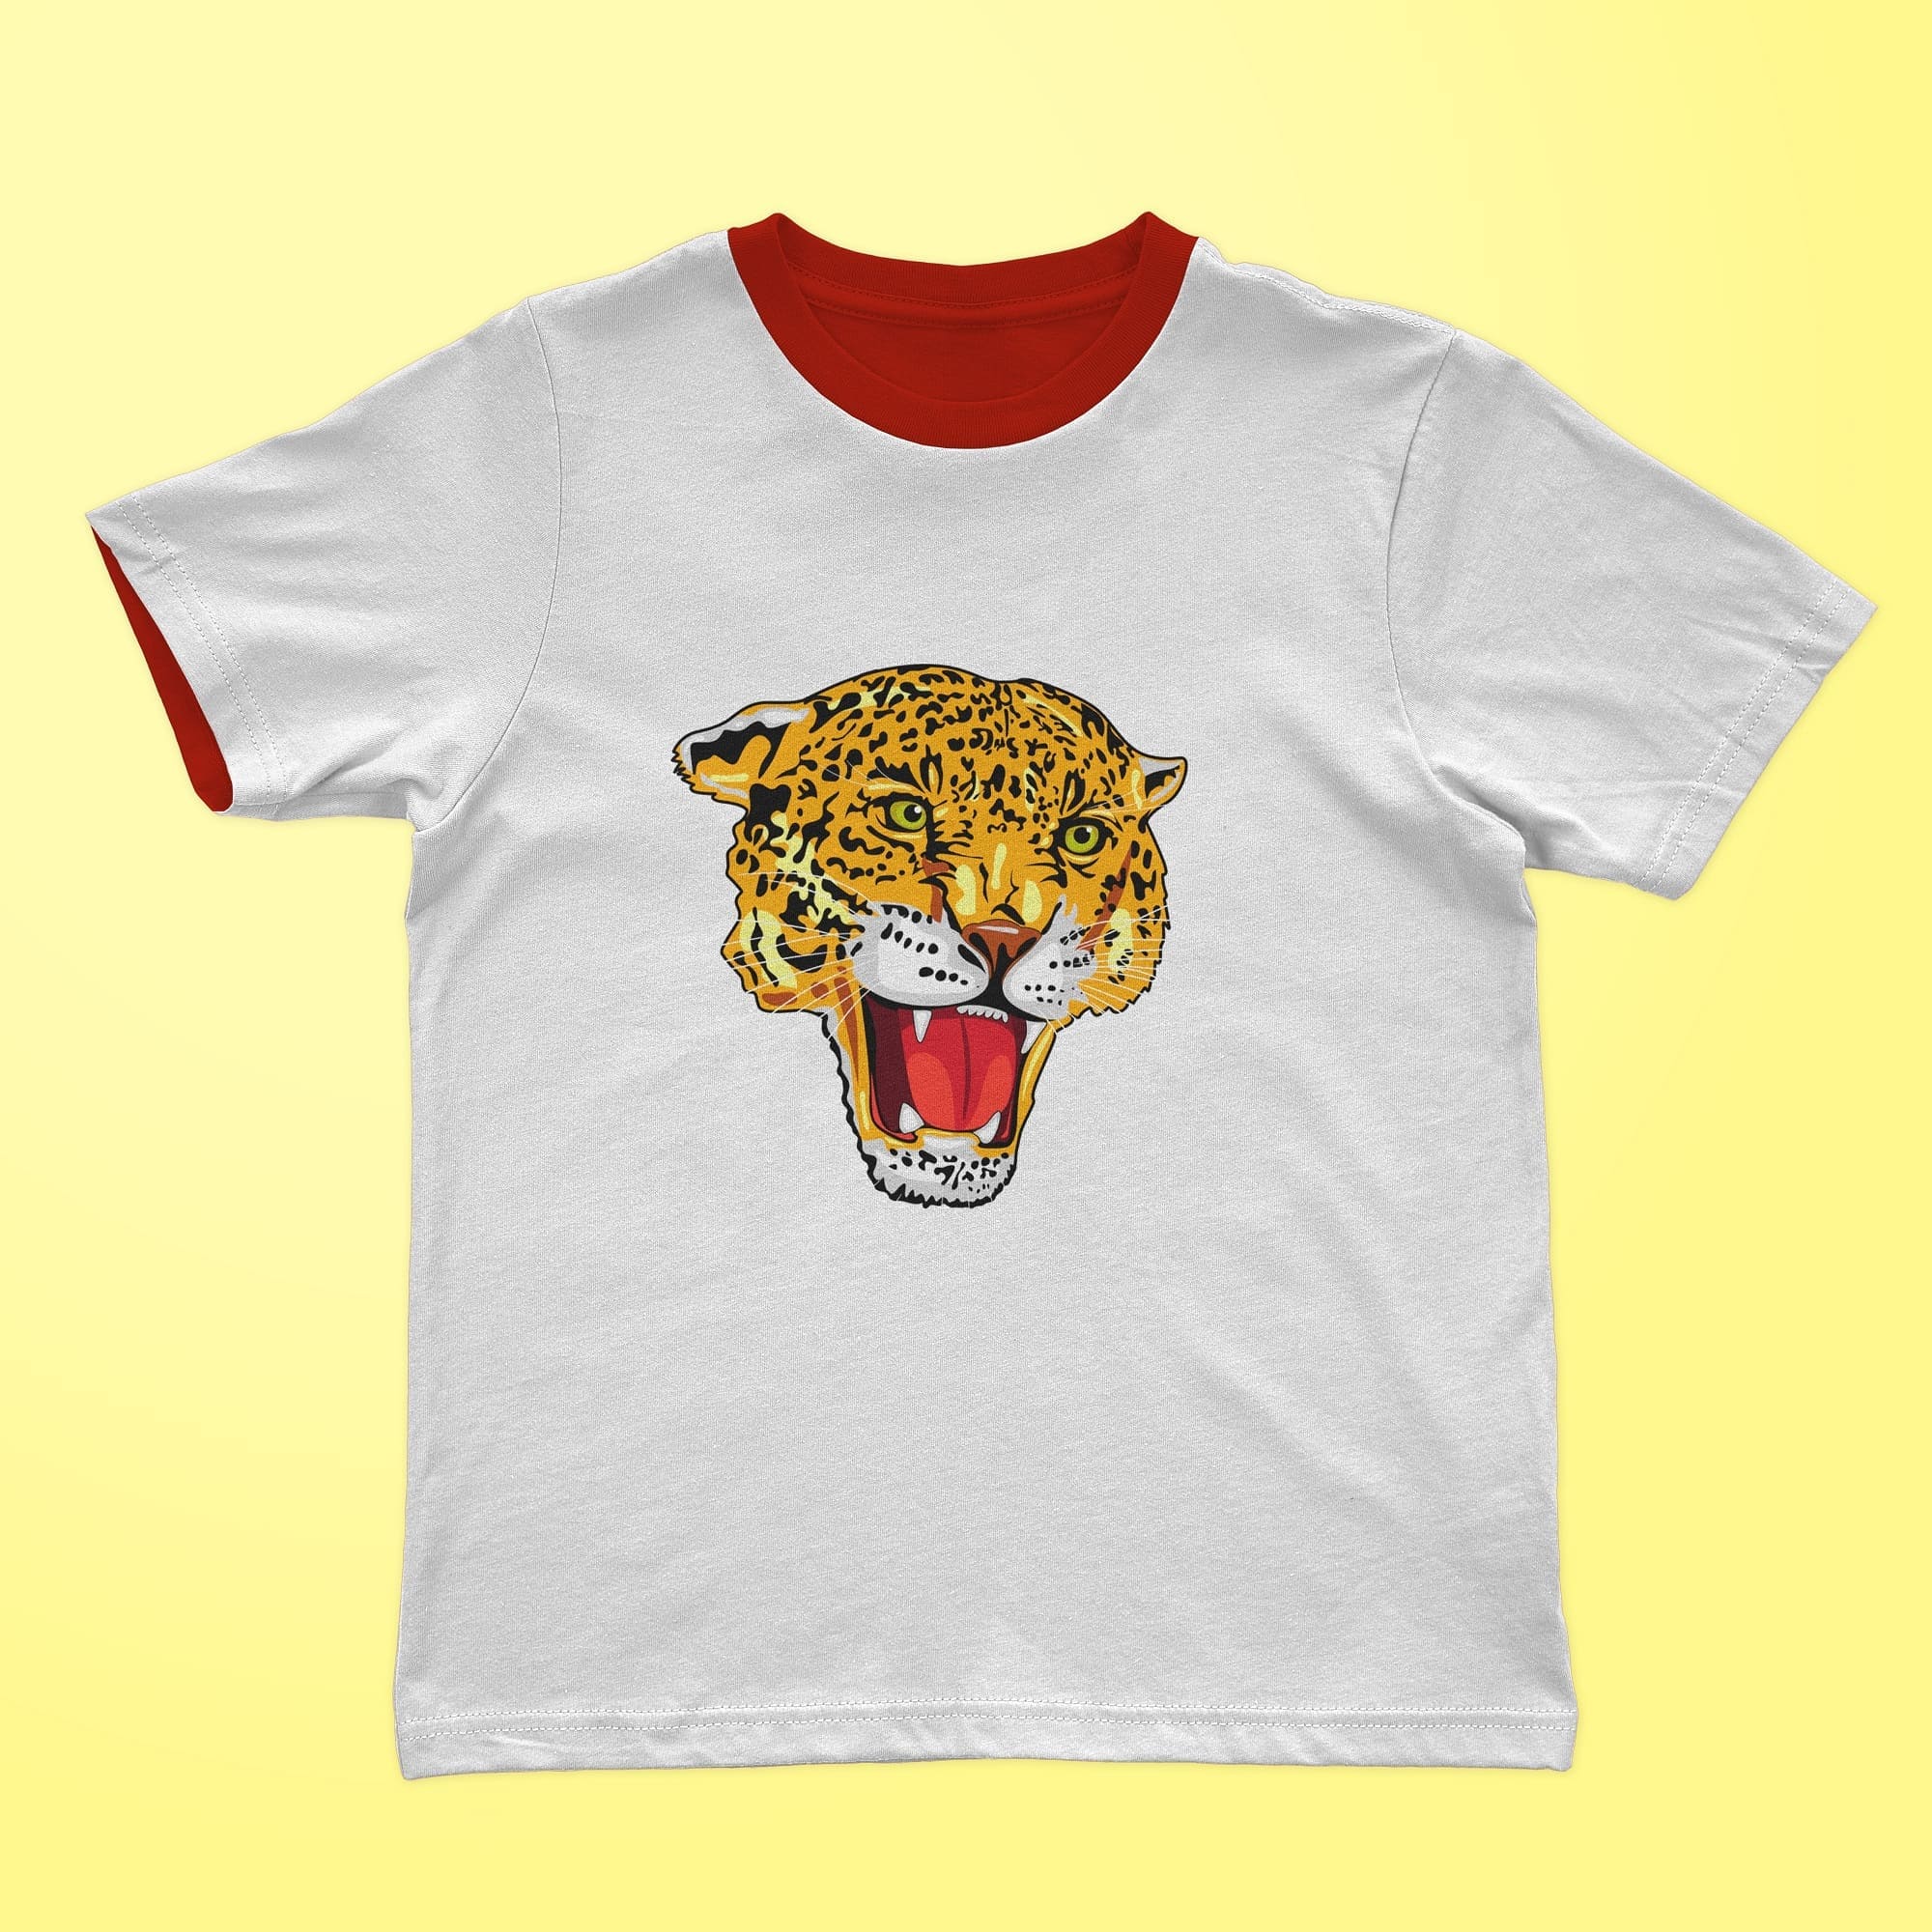 A classic white t-shirt with a print of a formidable leopard face.